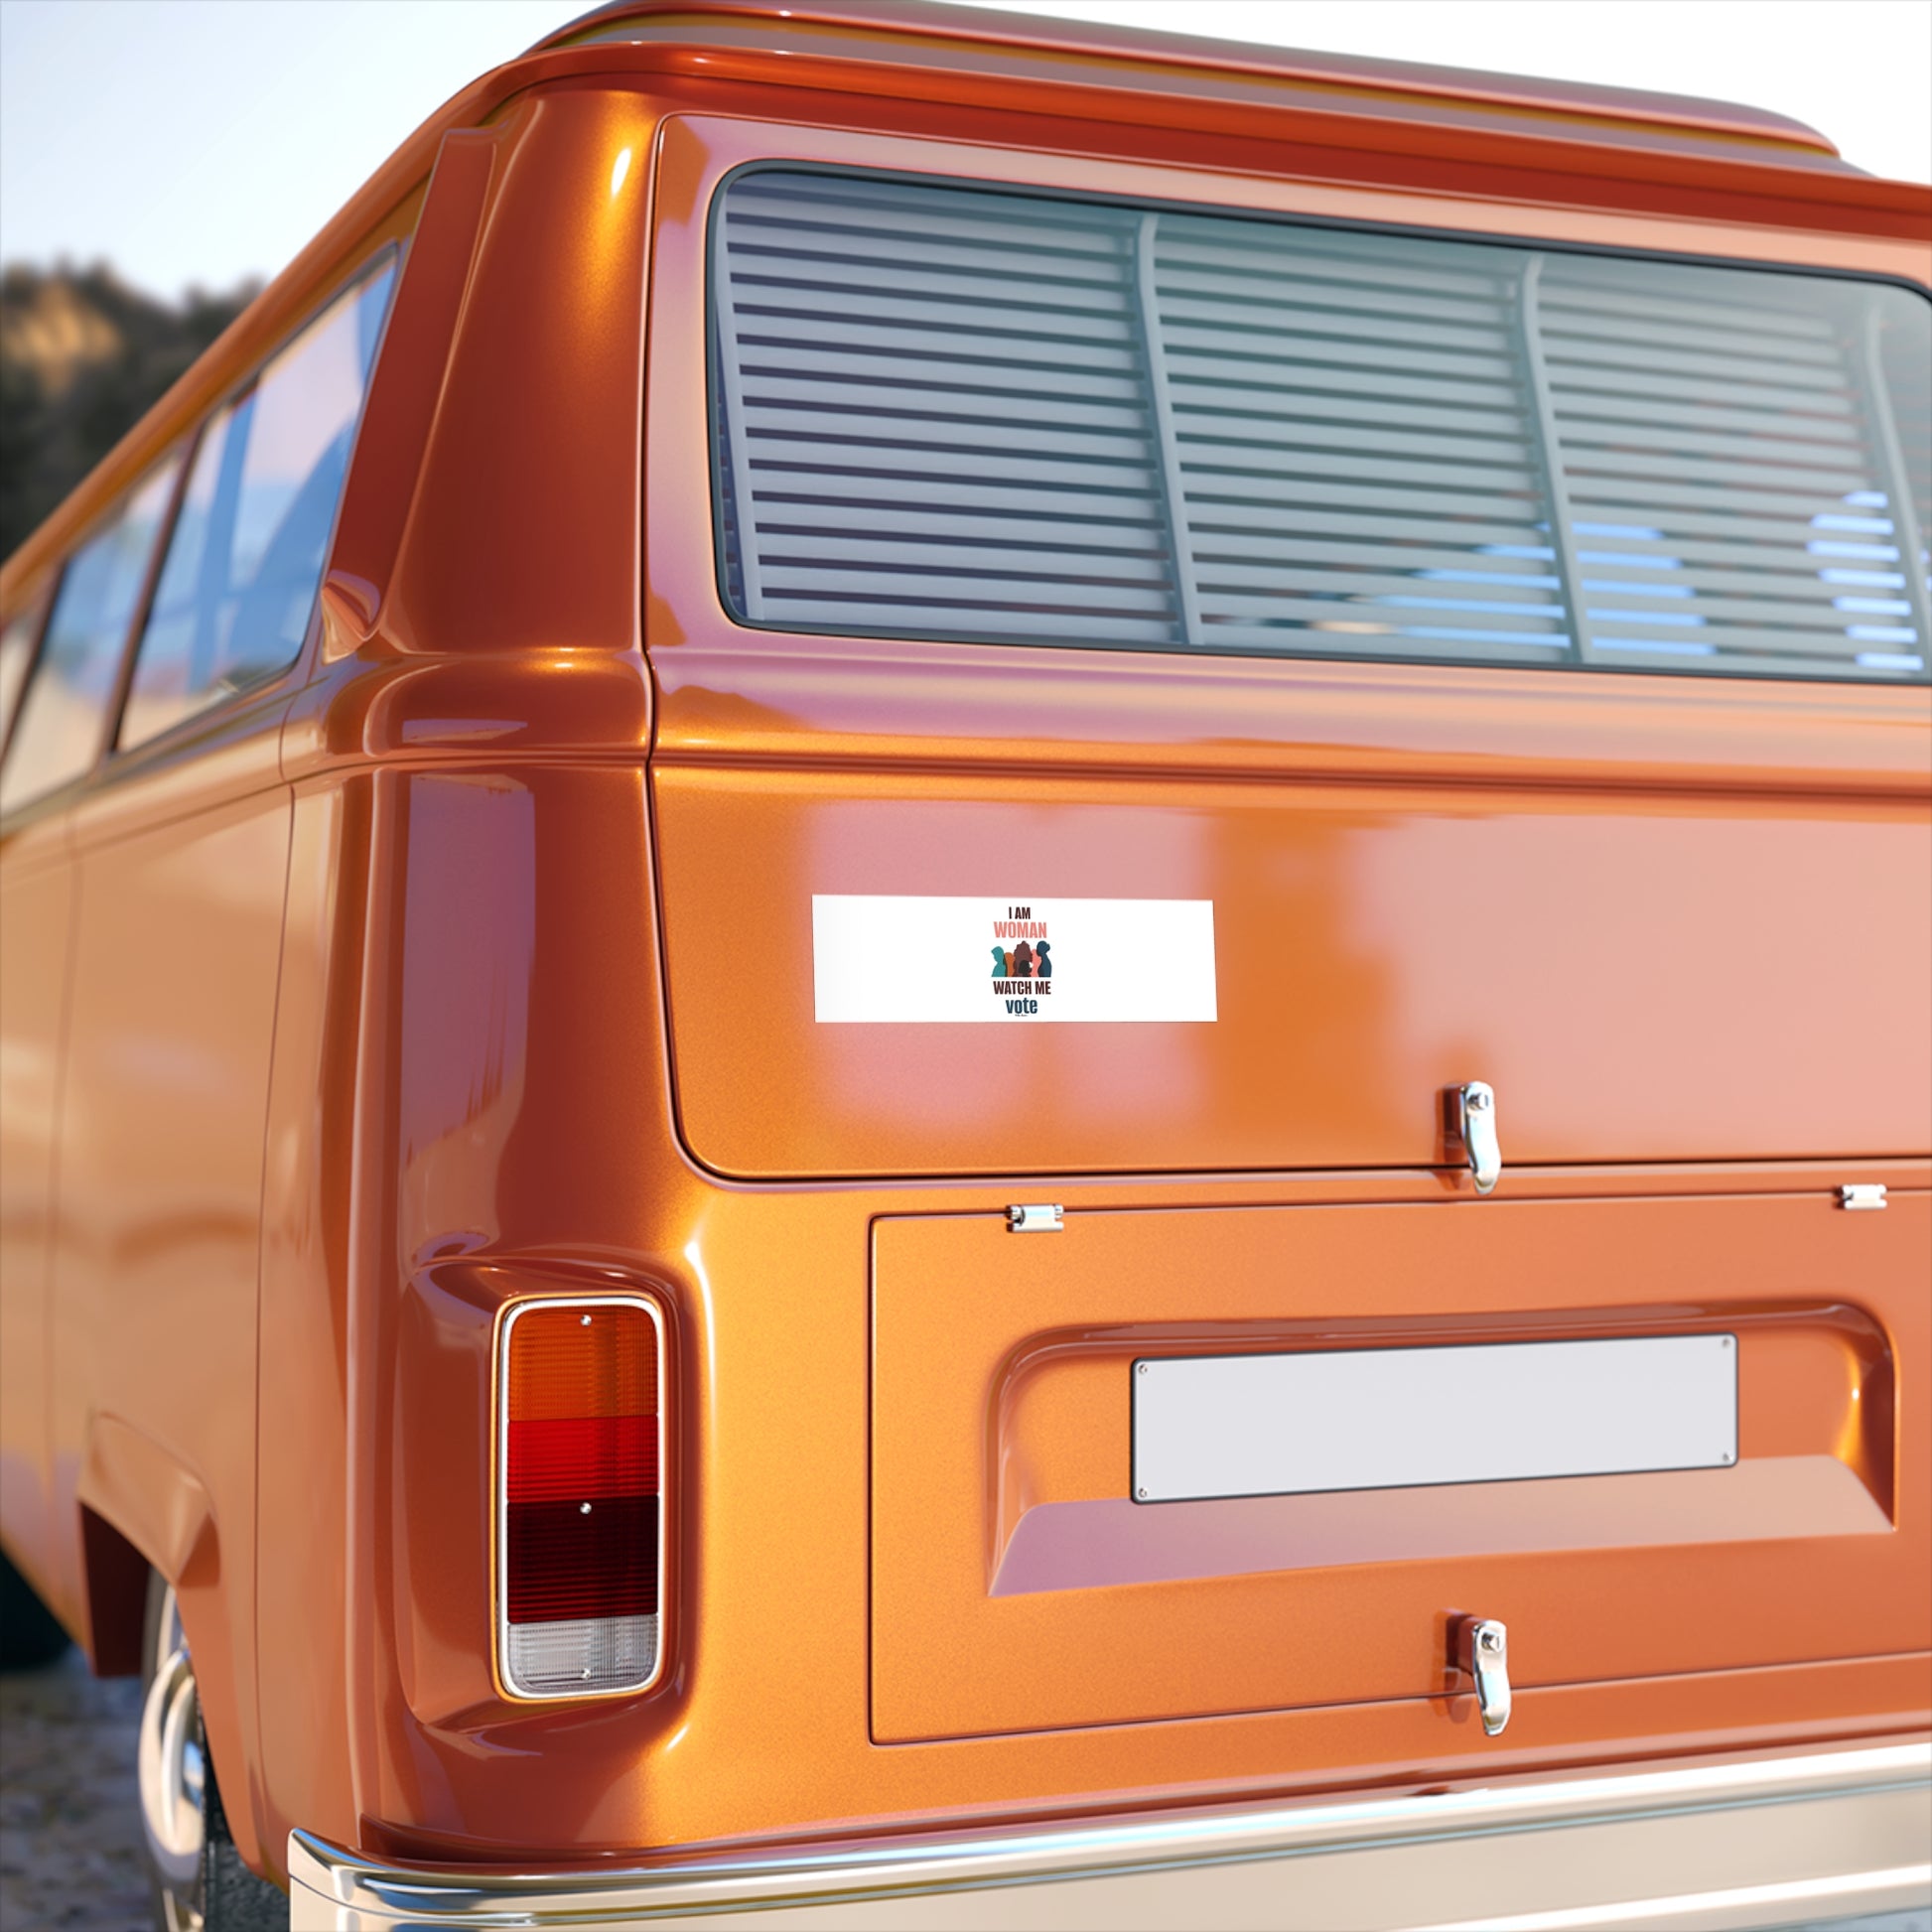 Rear view of an orange vintage van with a Canadian flag decal and Printify Voting Women's Bumper Stickers on the back window, and a blank license plate.